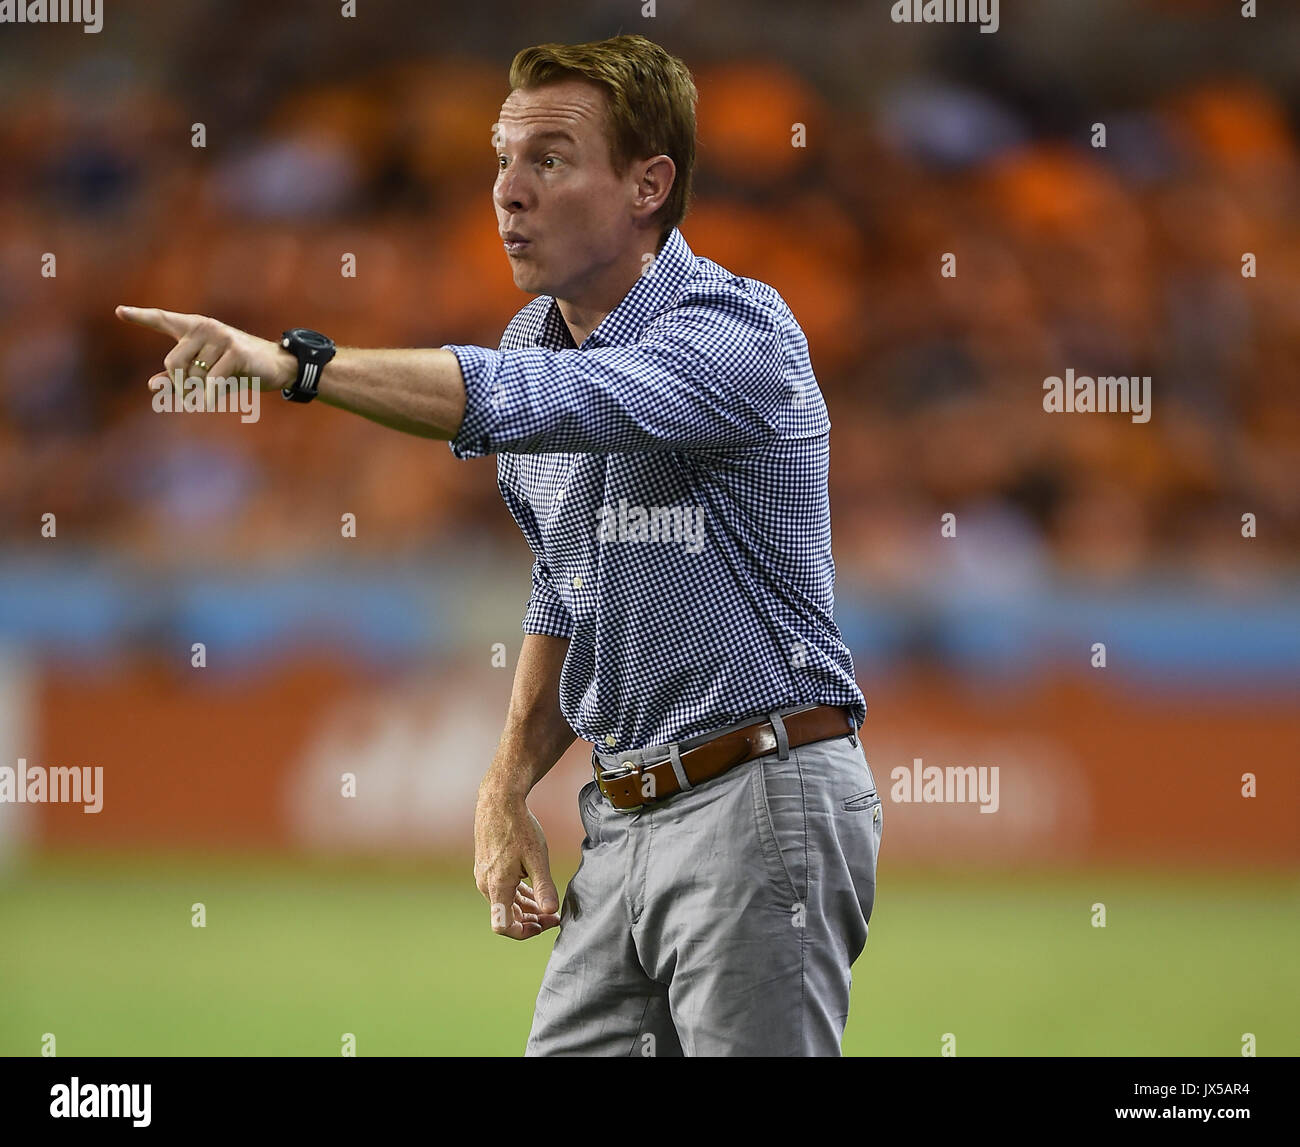 August 12, 2017: San Jose head coach Chris Leitch directs his team from the sideline during a Major League Soccer game between the Houston Dynamo and the San Jose Earthquakes at BBVA Compass Stadium in Houston, TX. Chris Brown/CSM Stock Photo